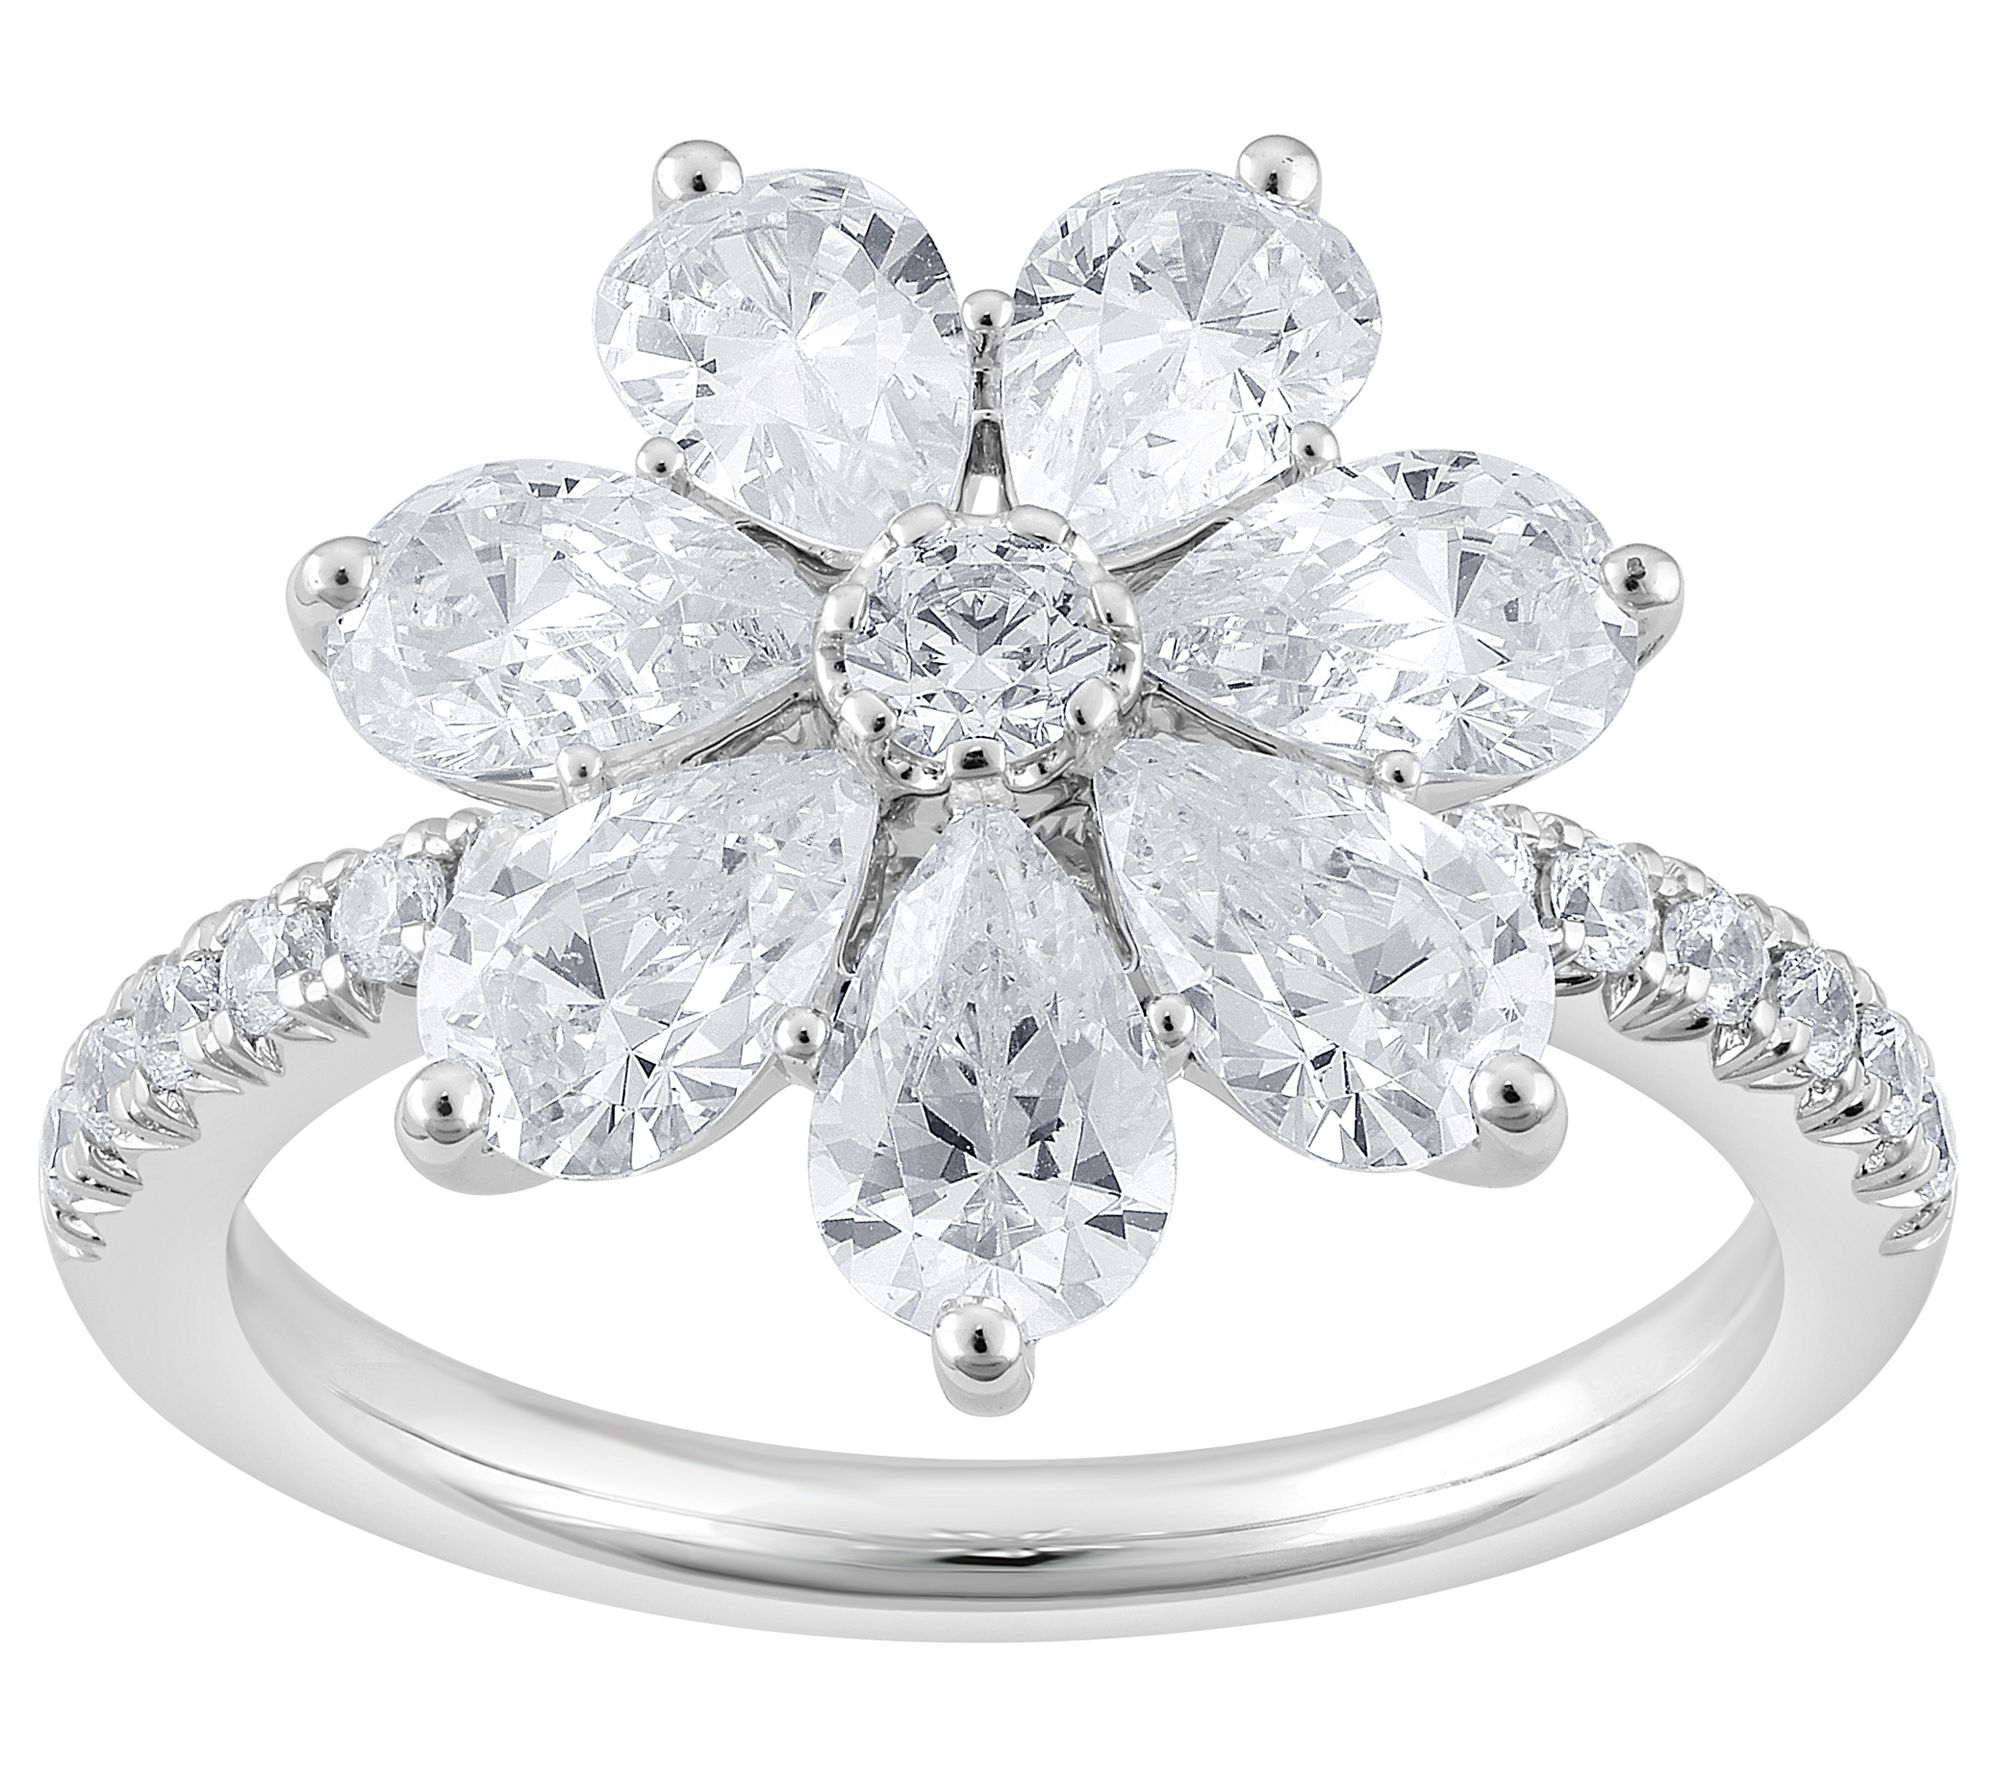 Star Blossom Ring, White Gold And Diamonds - Jewelry - Categories